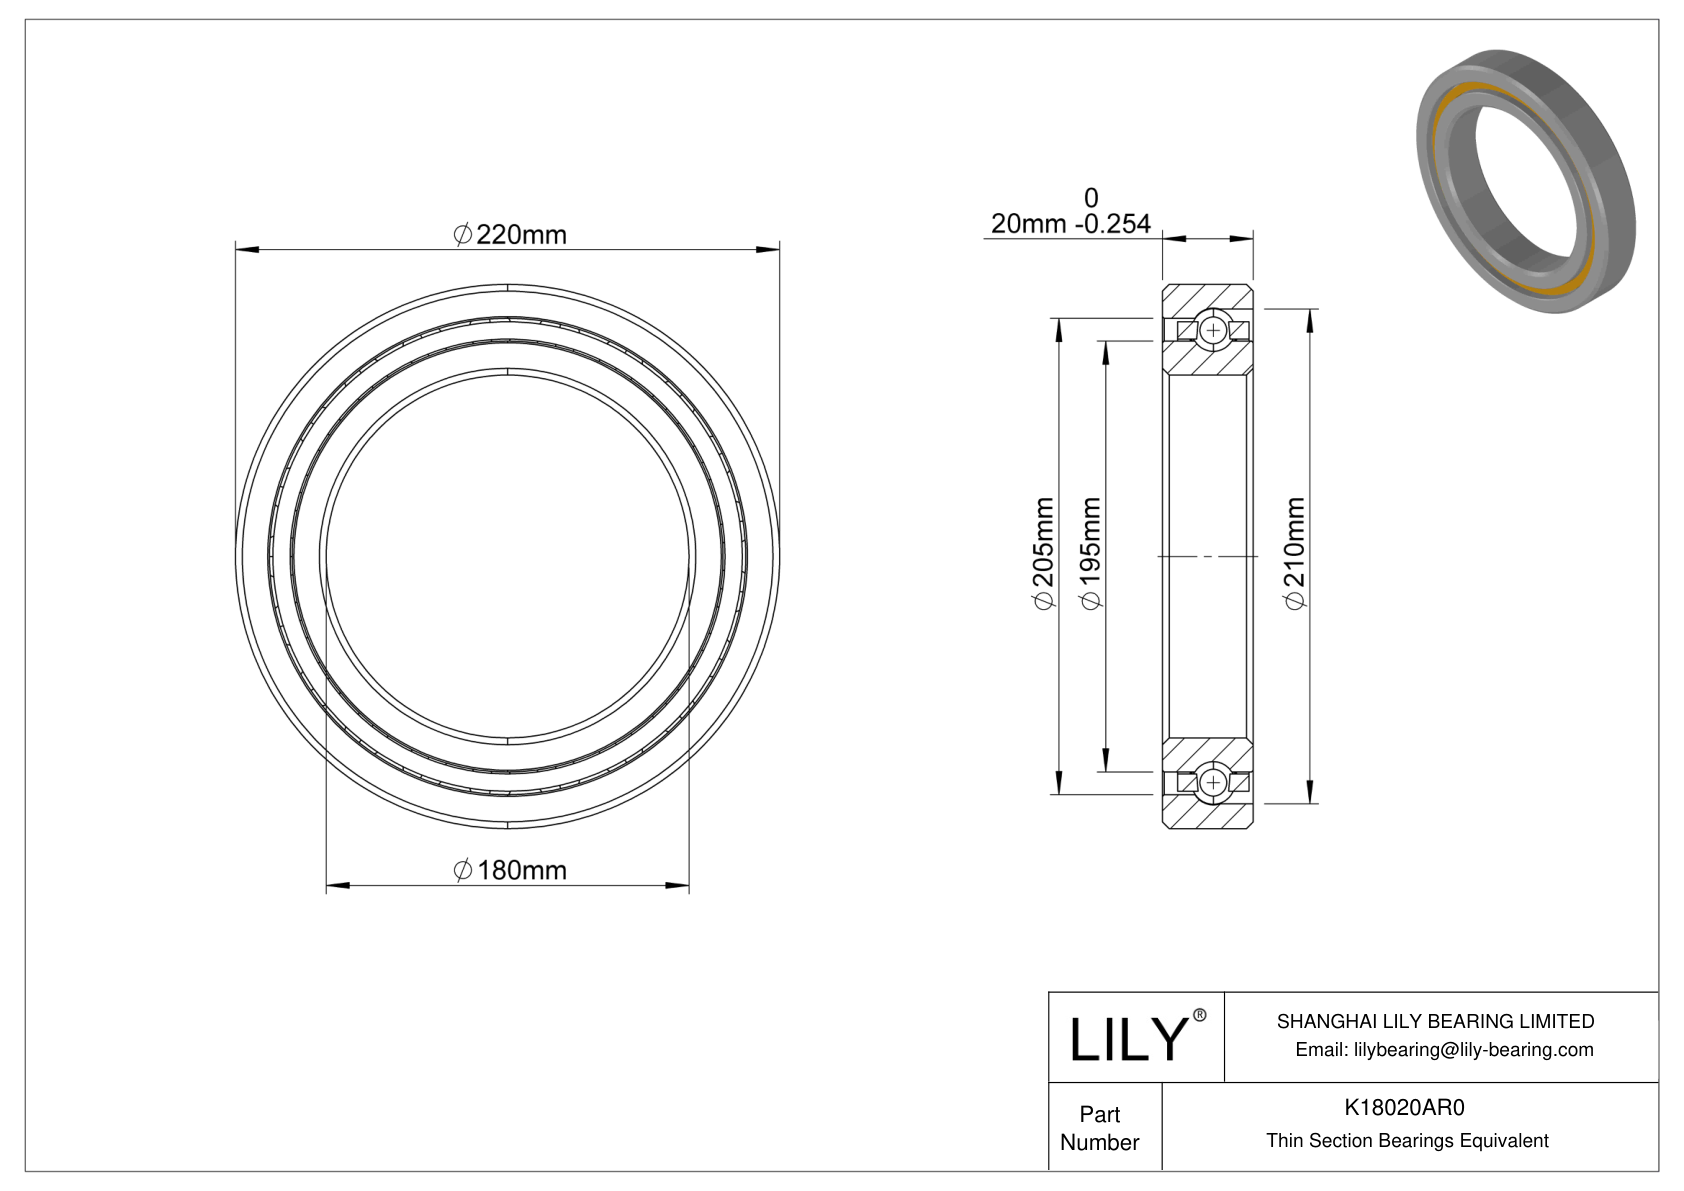 K18020AR0 Constant Section (CS) Bearings cad drawing